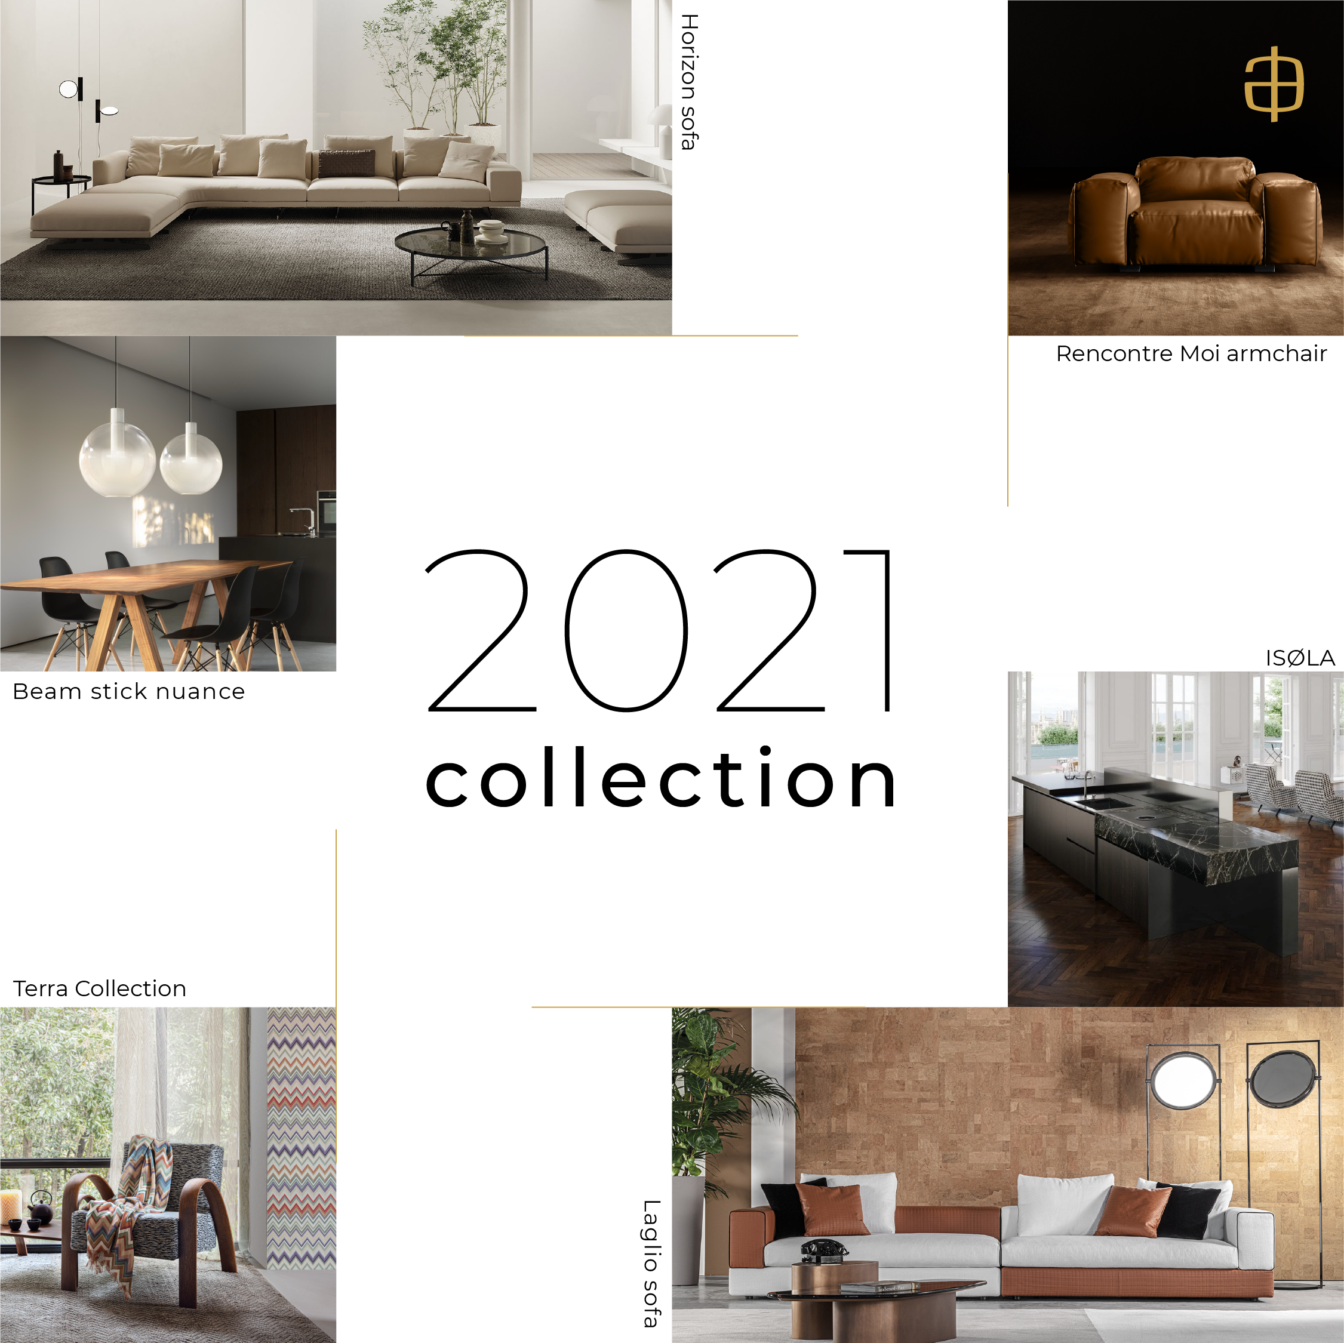 Year-end review: walking through our brands’ 2021 collection